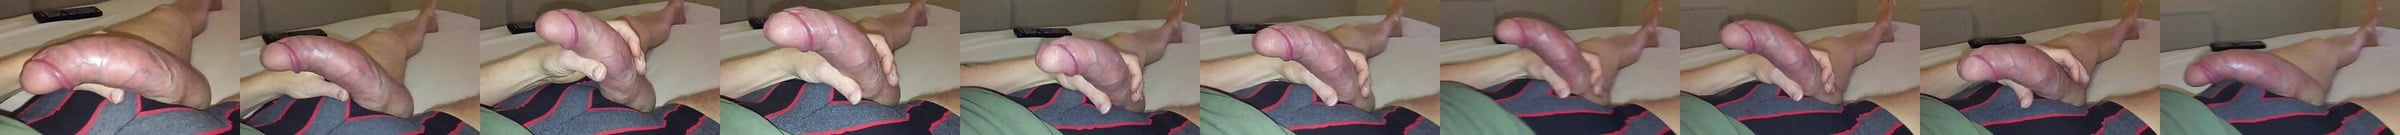 Big Cock And Huge Balls Dripping And Swinging Gay Porn 5c Xhamster